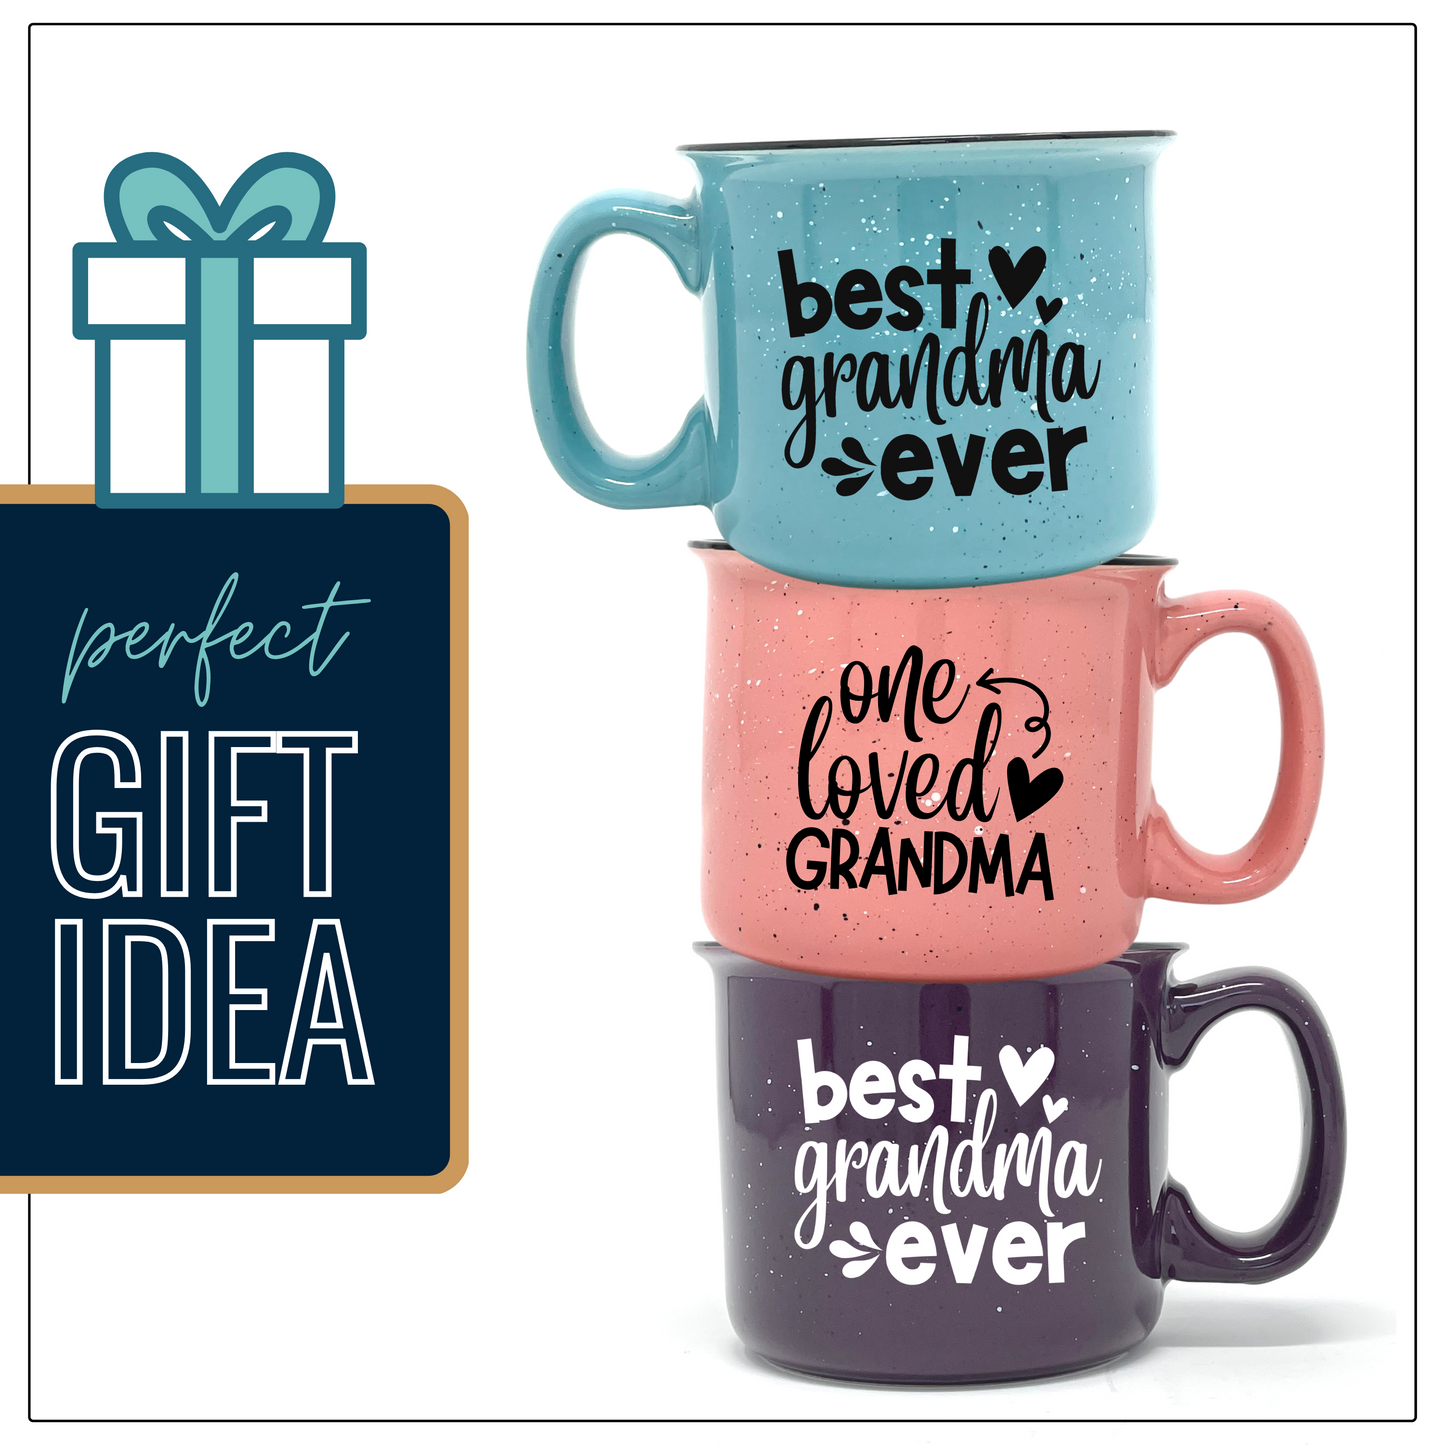 Cute Funny Coffee Mug for Grandma - Best Grandma Ever - Unique Fun Gifts for Grandmother, Grandma from Grandkids - Coffee Cups & Mugs with Quotes